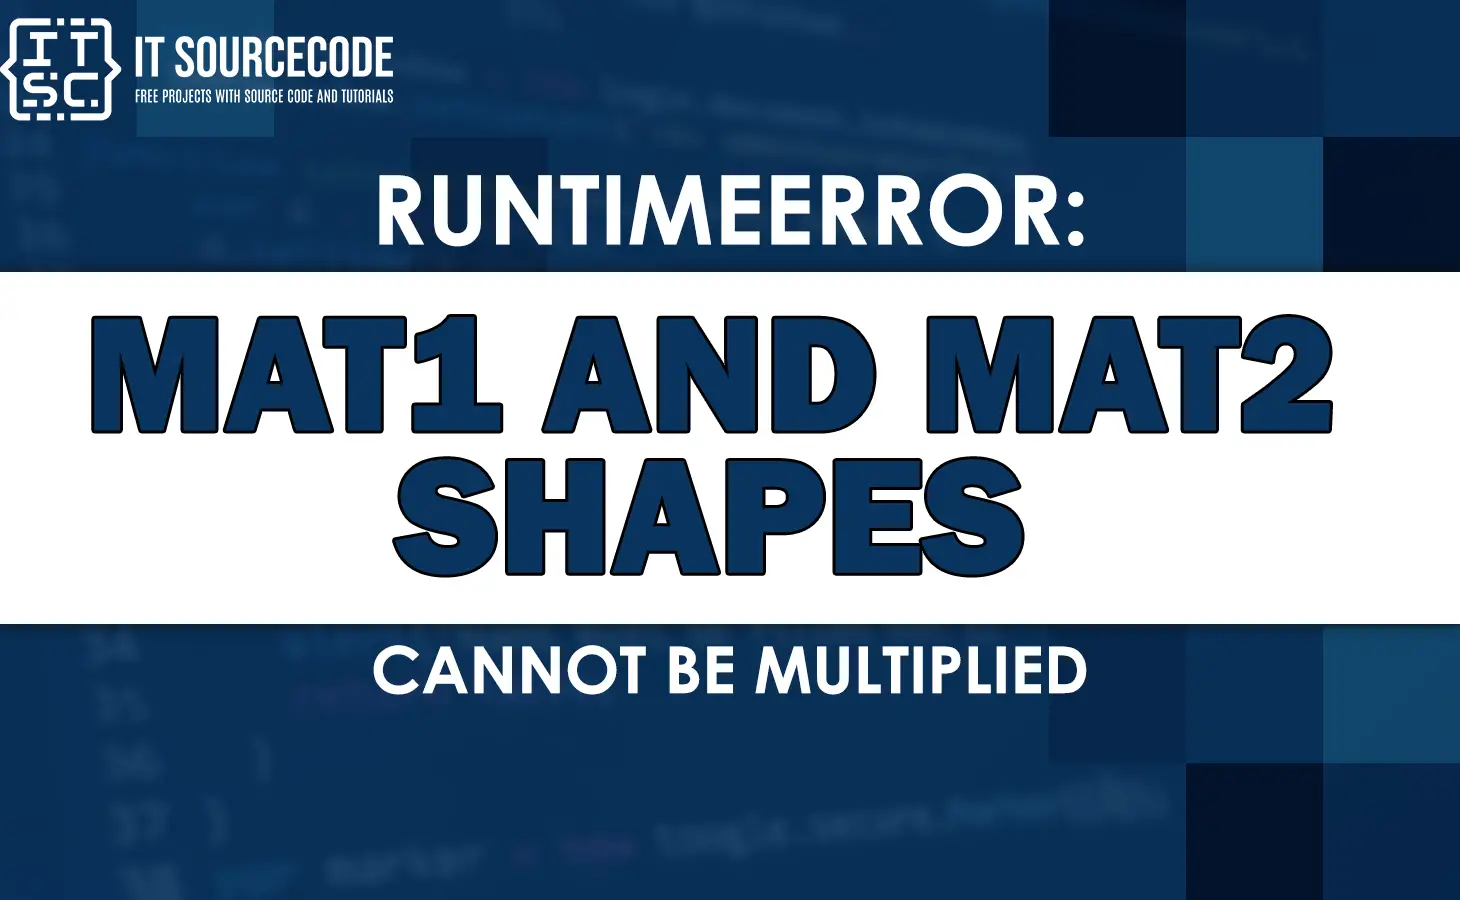 Runtimeerror mat1 and mat2 shapes cannot be multiplied